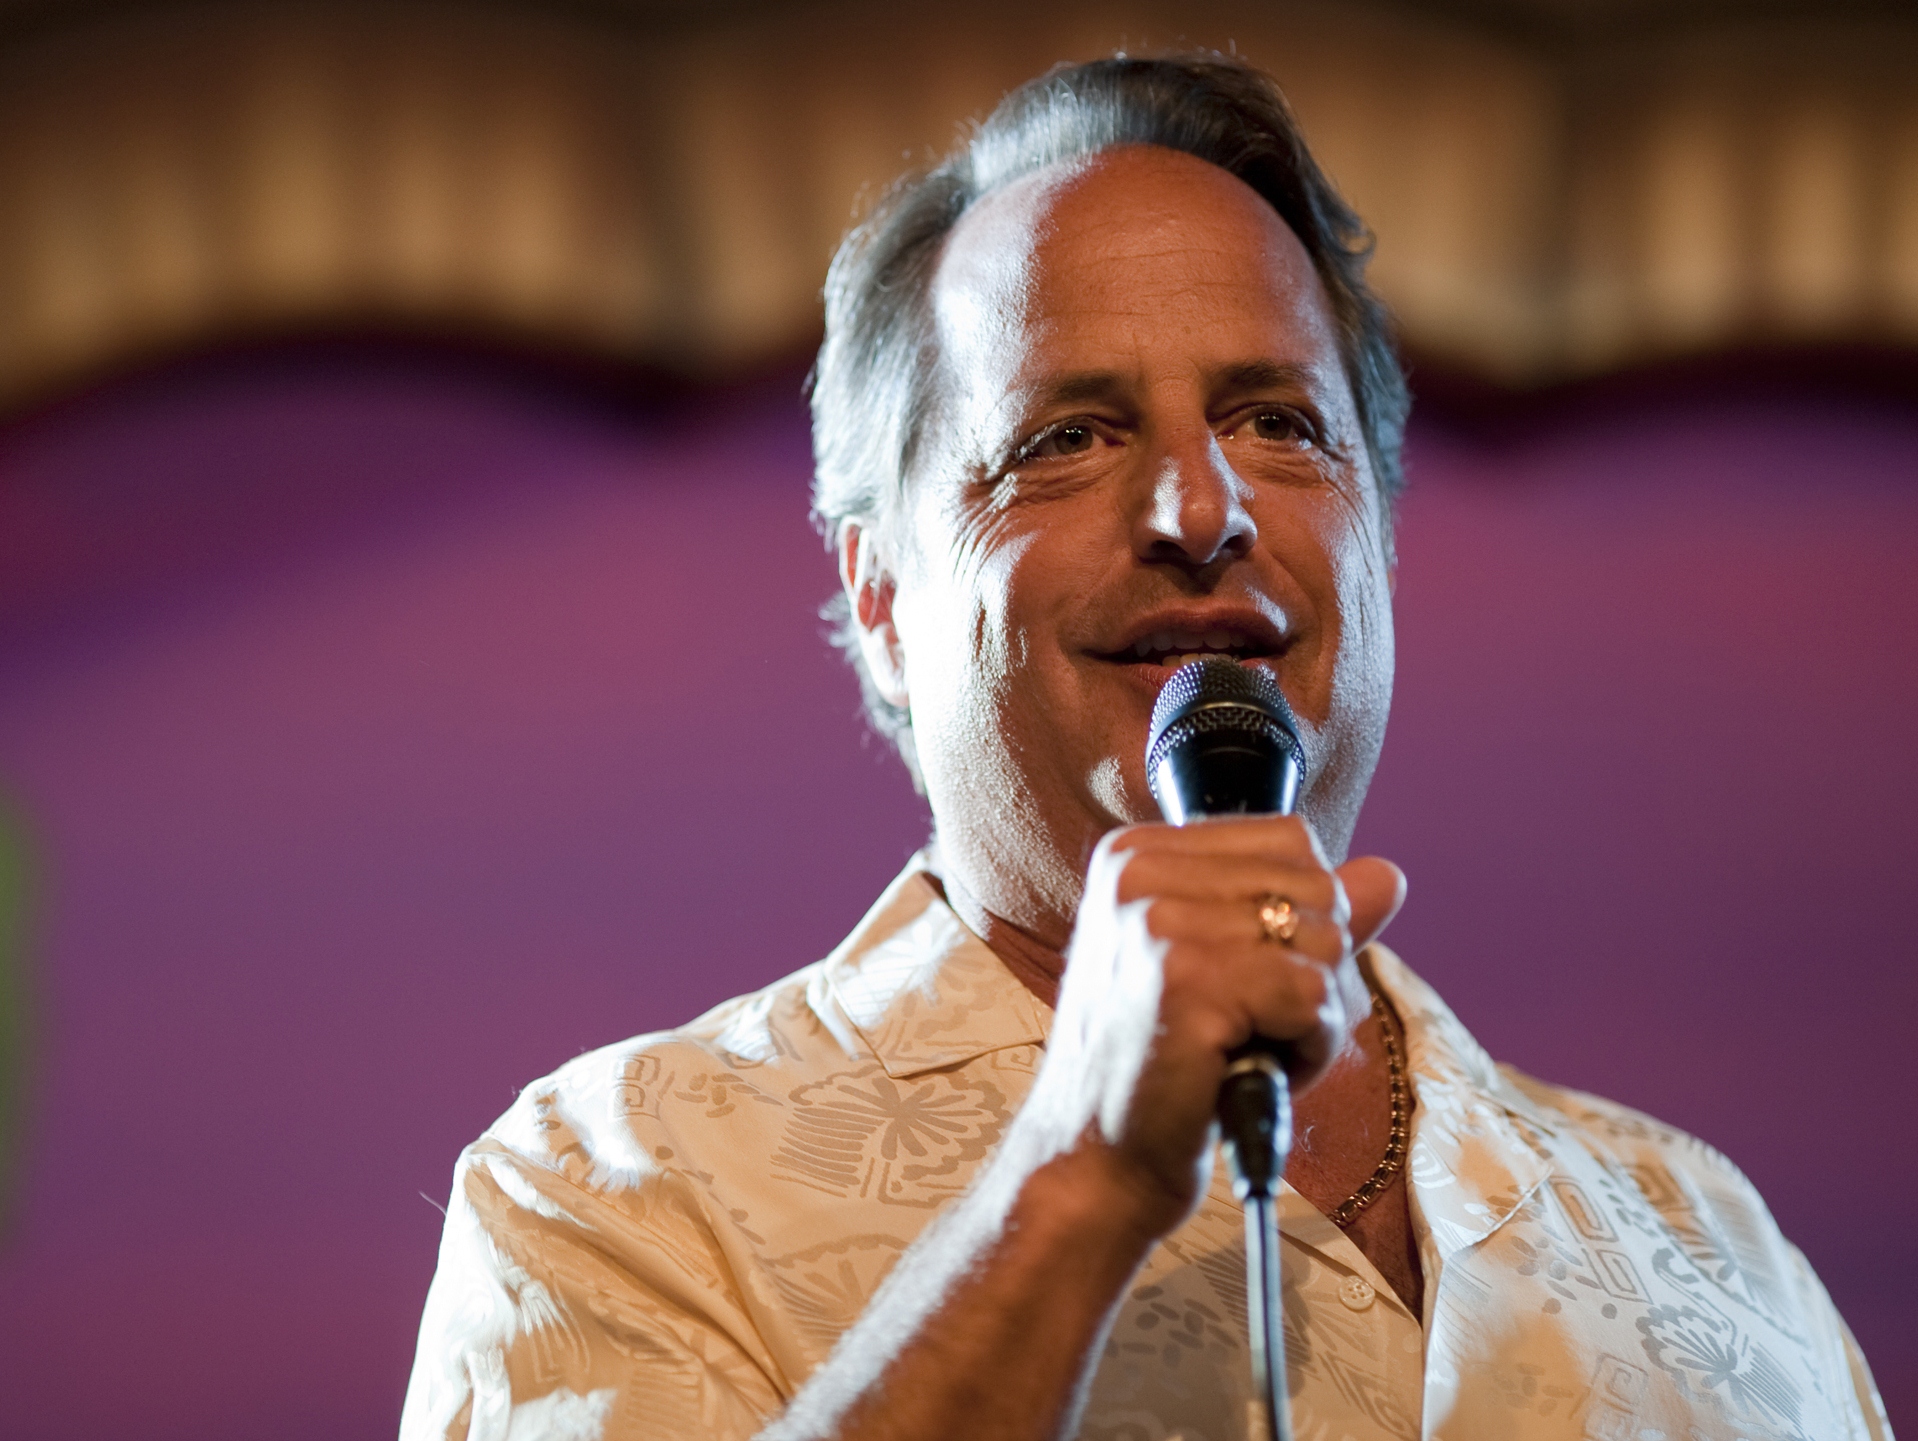 Report: Lovitz Put Career in Jeopardy by Critiquing Obama